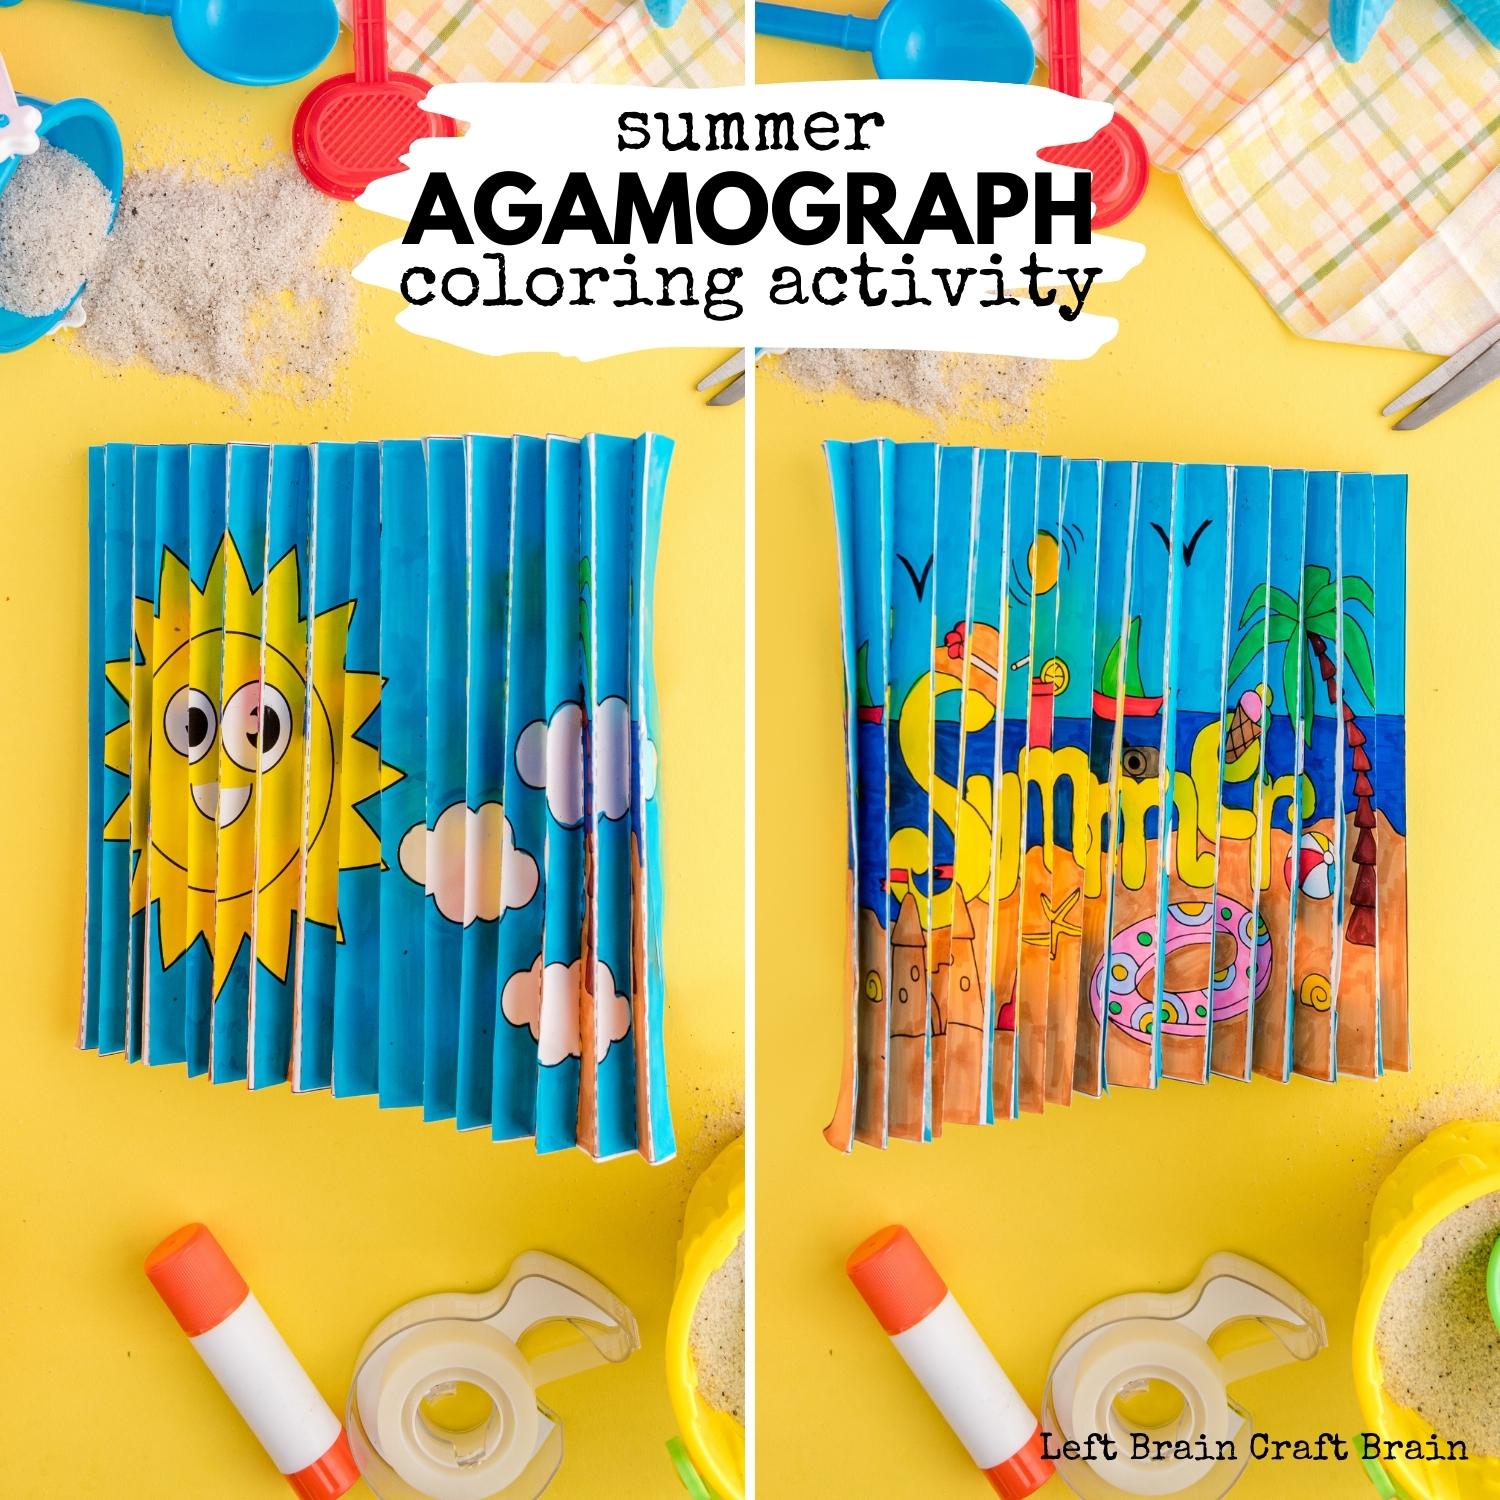 Have some fun coloring this summer with an agamograph, a unique papercraft. It flips the picture when you shift the angle for twice the fun.